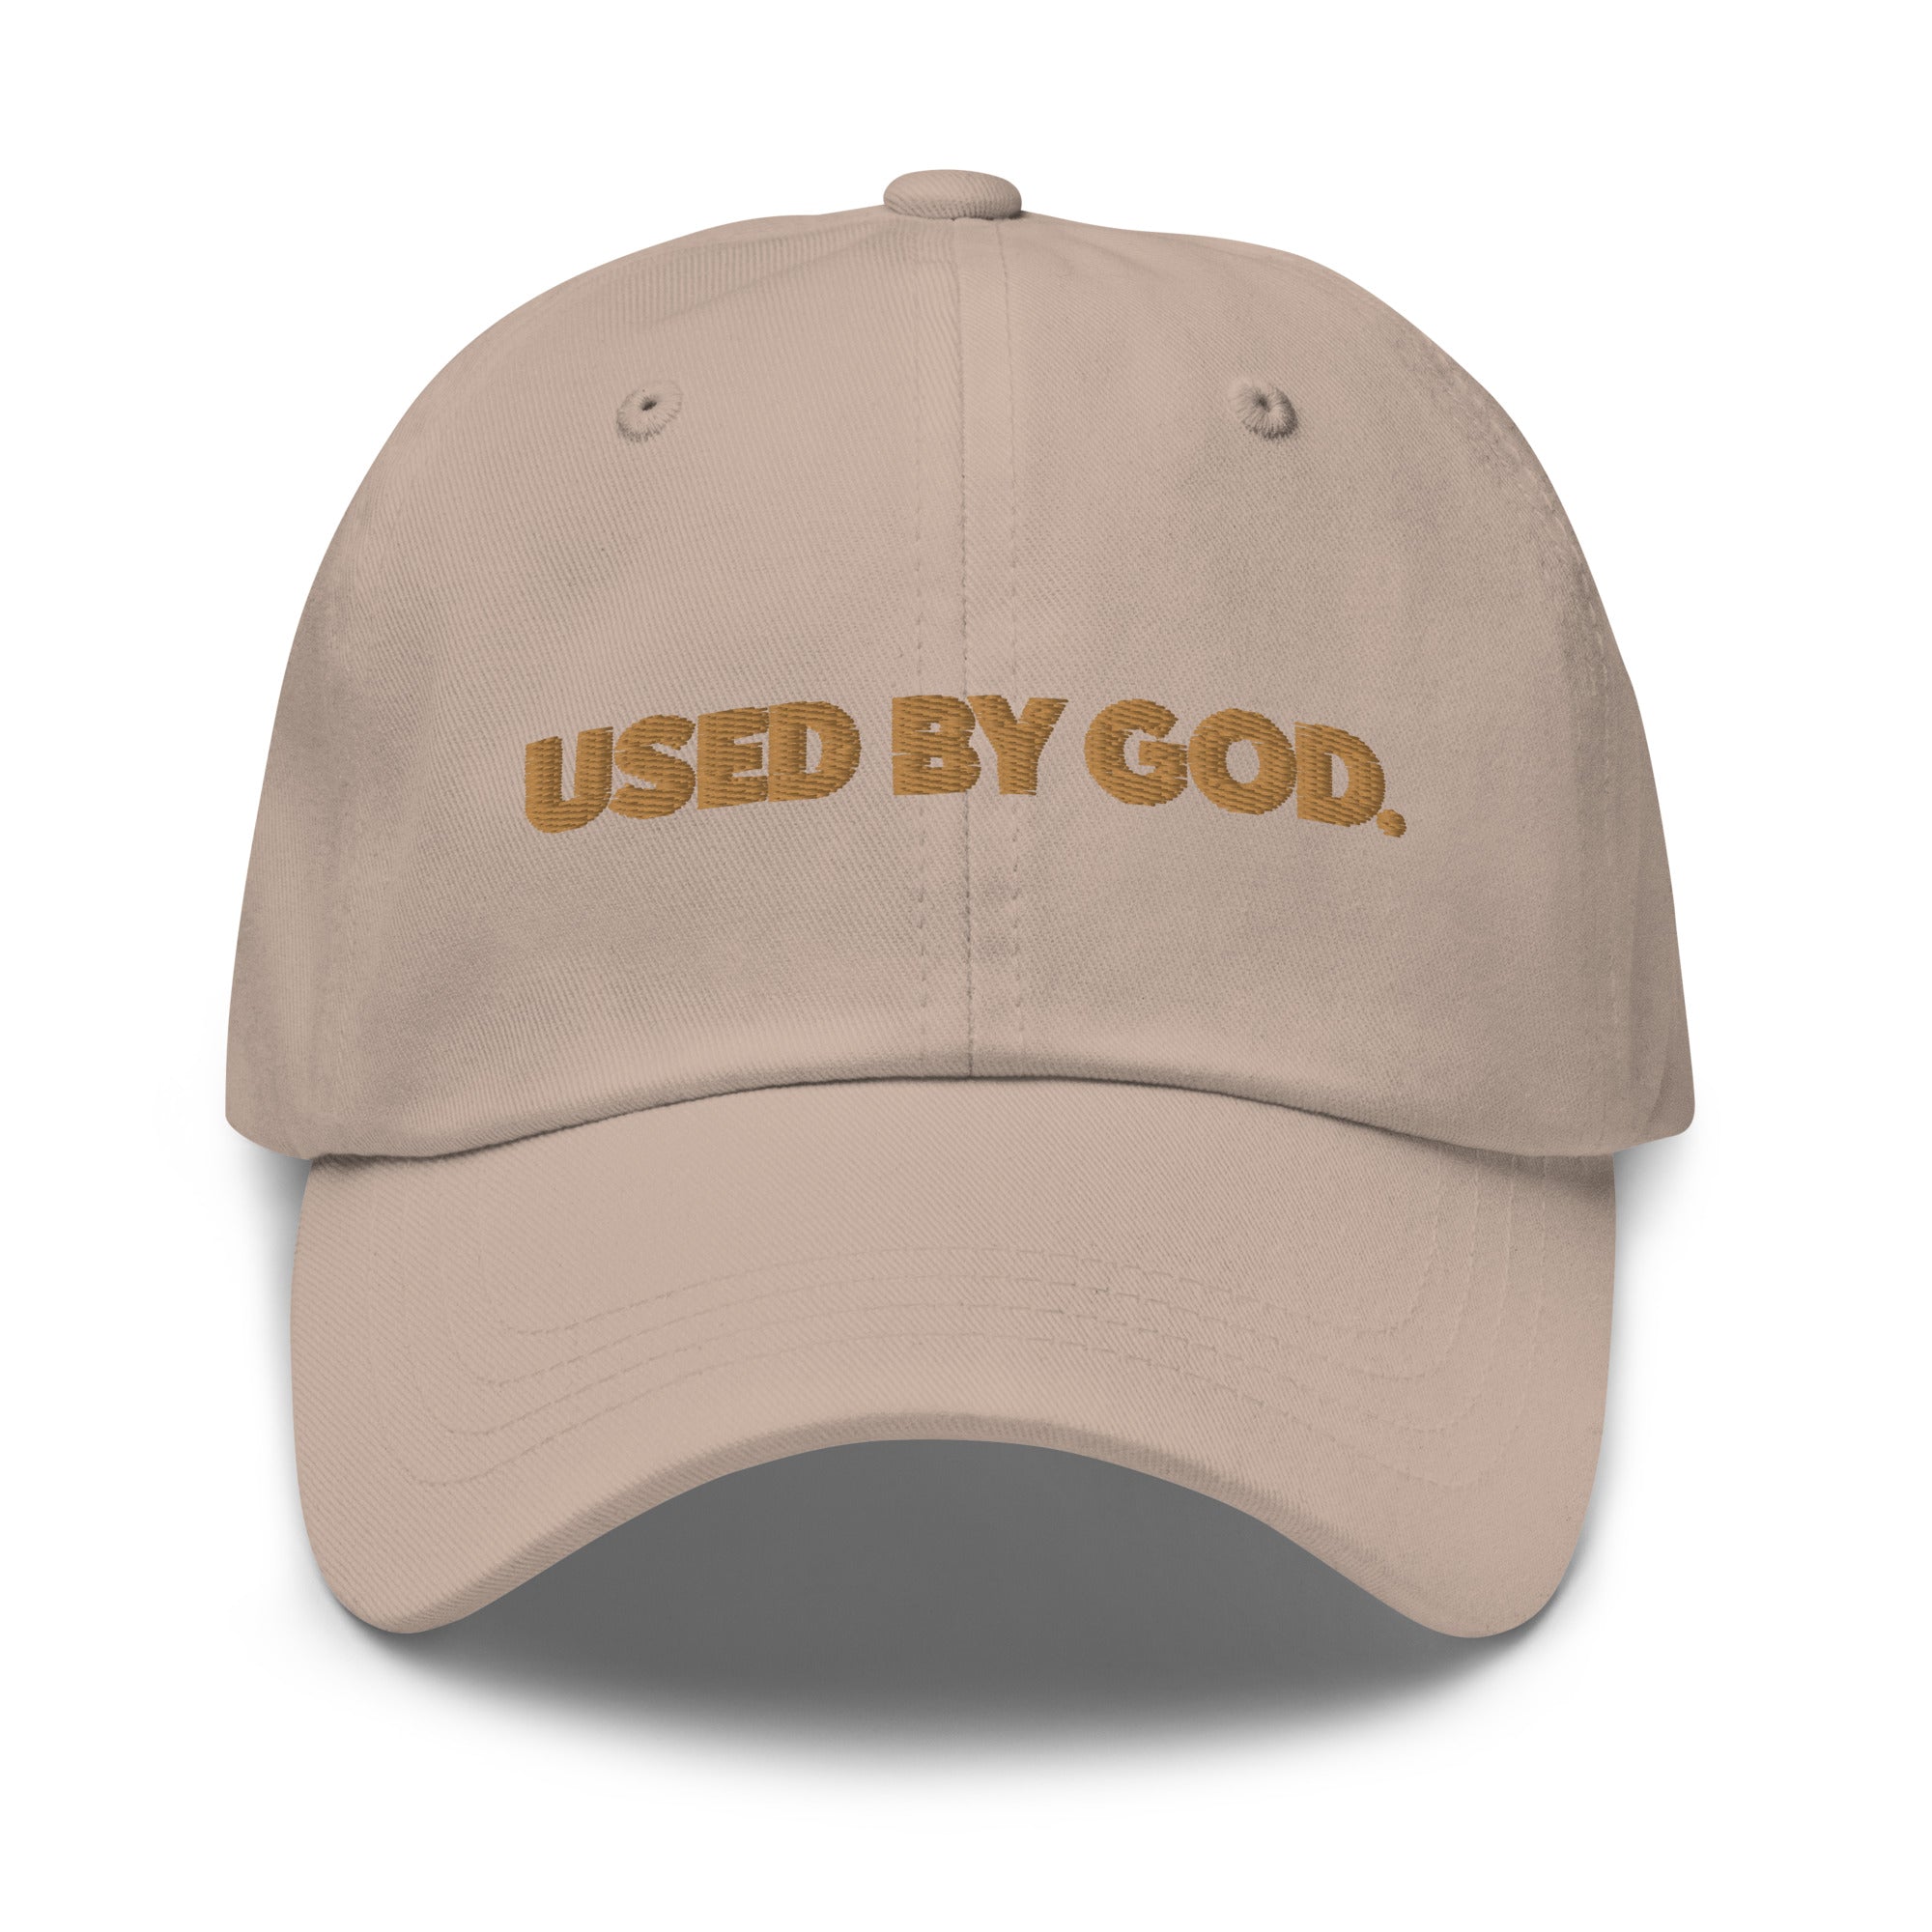 UBG Chino Dad Hat, Used By God, Used By God Clothing, Christian Apparel, Christian Hats, Christian T-Shirts, Christian Clothing, God Shirts, Christian Sweatshirts, God Clothing, Jesus Hoodie, Jesus Clothes, God Is Dope, Art Of Homage, Red Letter Clothing, Elevated Faith, Active Faith Sports, Beacon Threads, God The Father Apparel